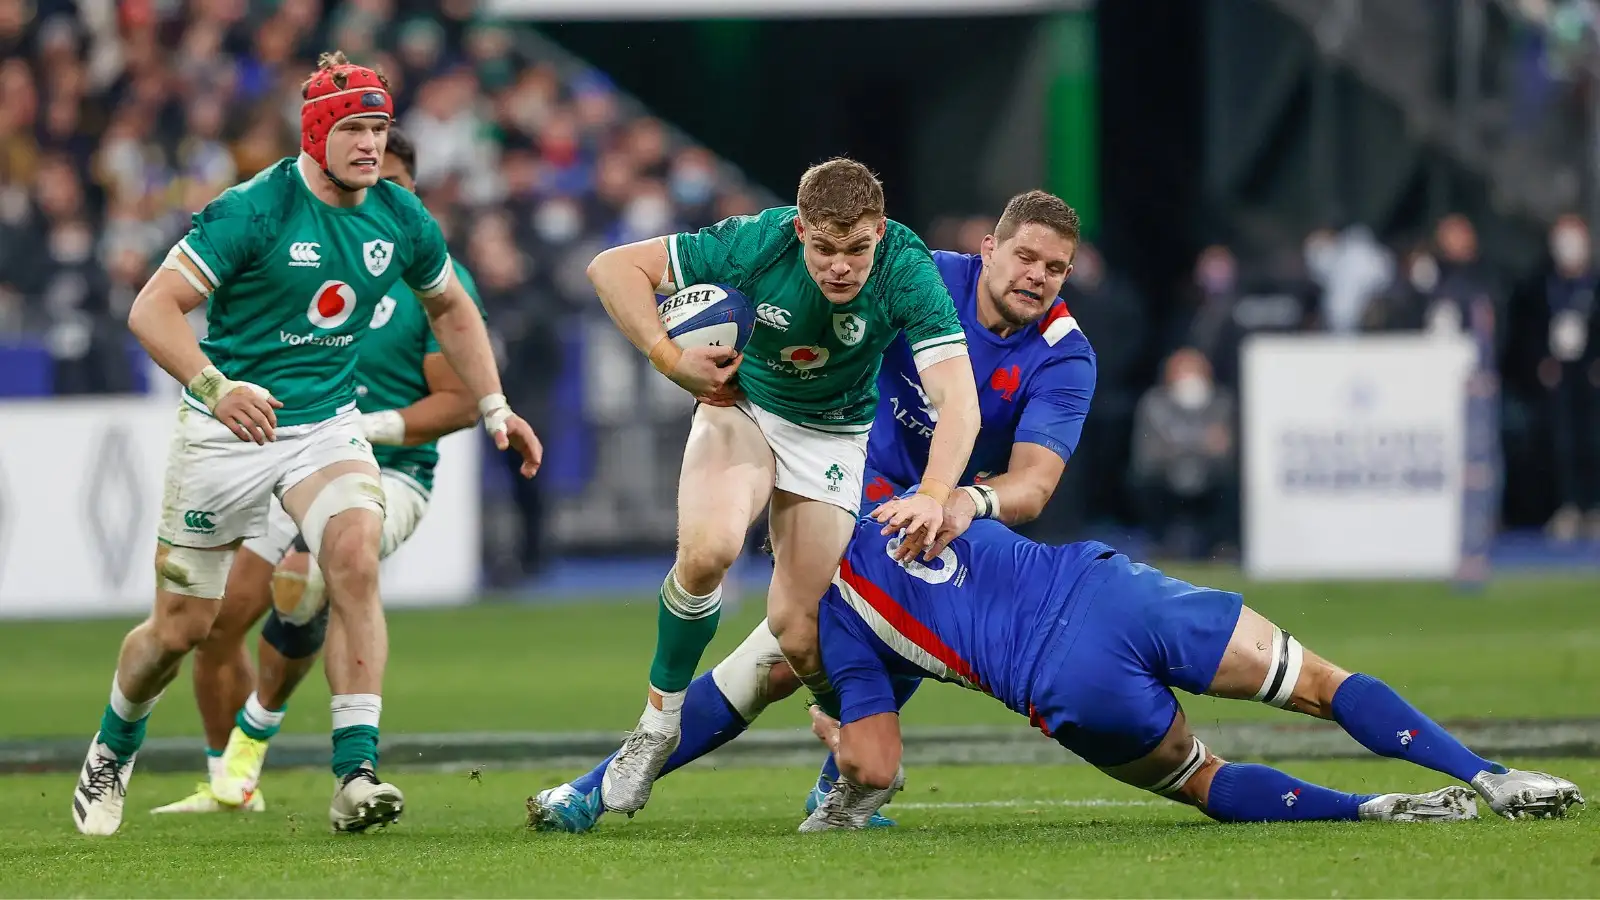 France World Rugby Rankings Six Nations: Ireland's place on top of the World Rugby rankings is on the line in round two of the Six Nations when they face host France in Dublin.